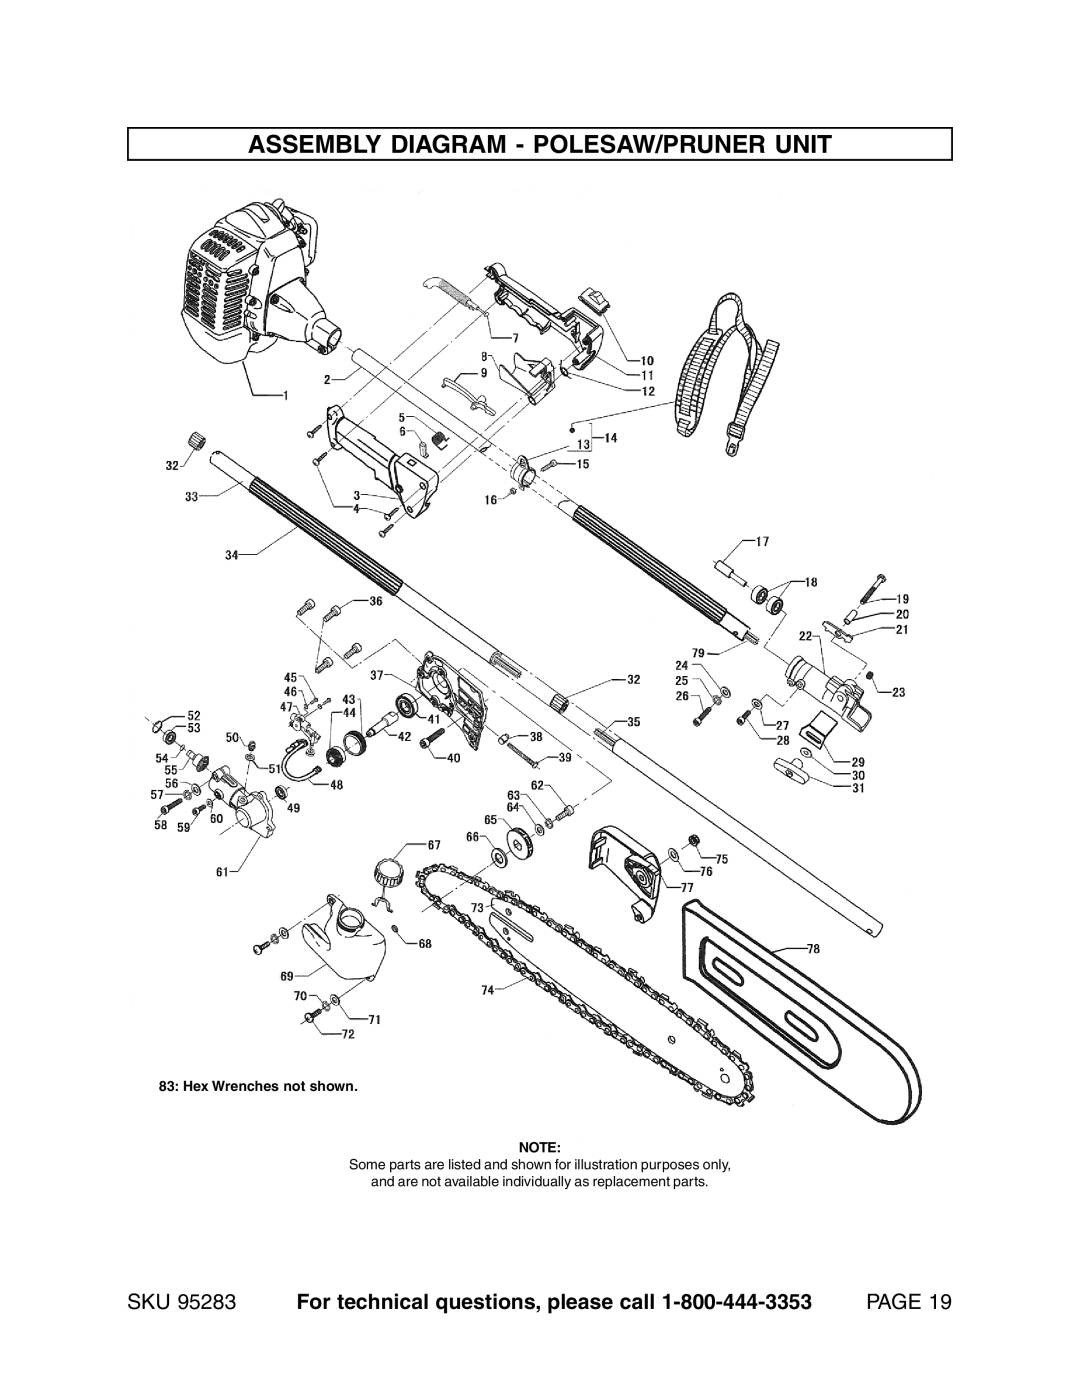 Chicago Electric 95283 warranty Assembly Diagram - Polesaw/Pruner Unit, For technical questions, please call, Page 